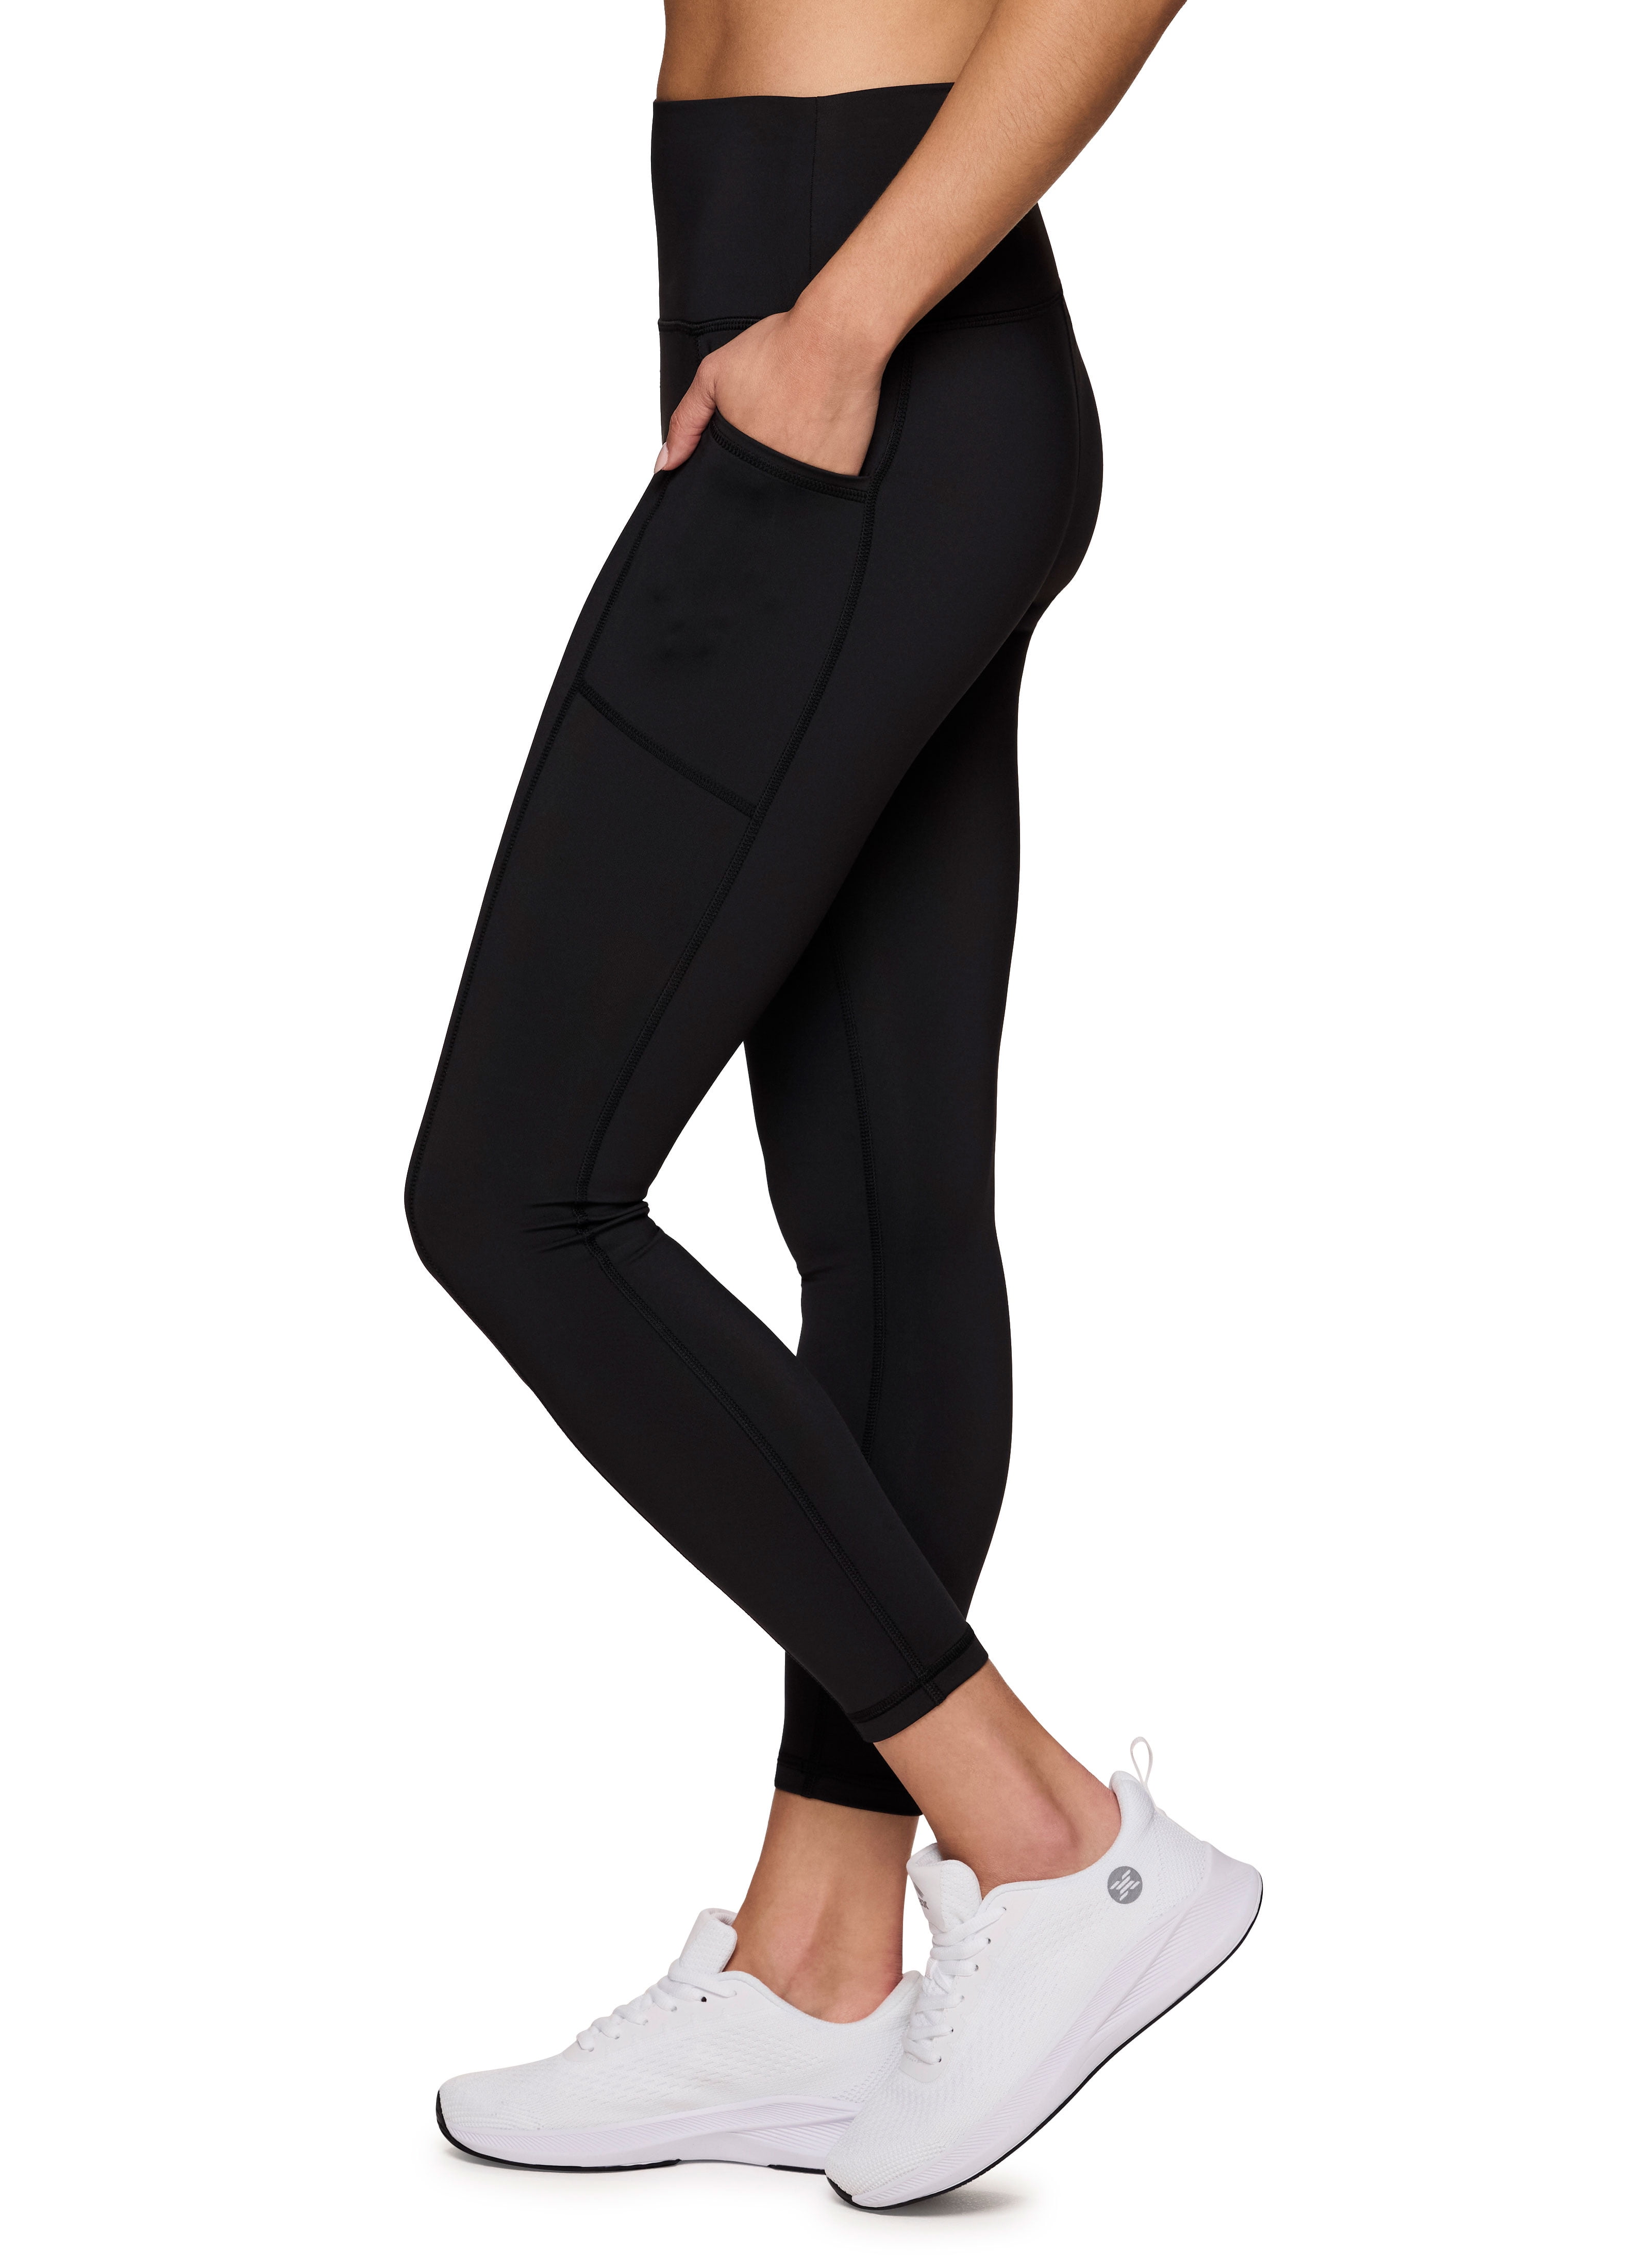 RBX Womens Activewear Leggings Black Stretch Full Length Pull On Wide Waist  26 - $11 - From Missy